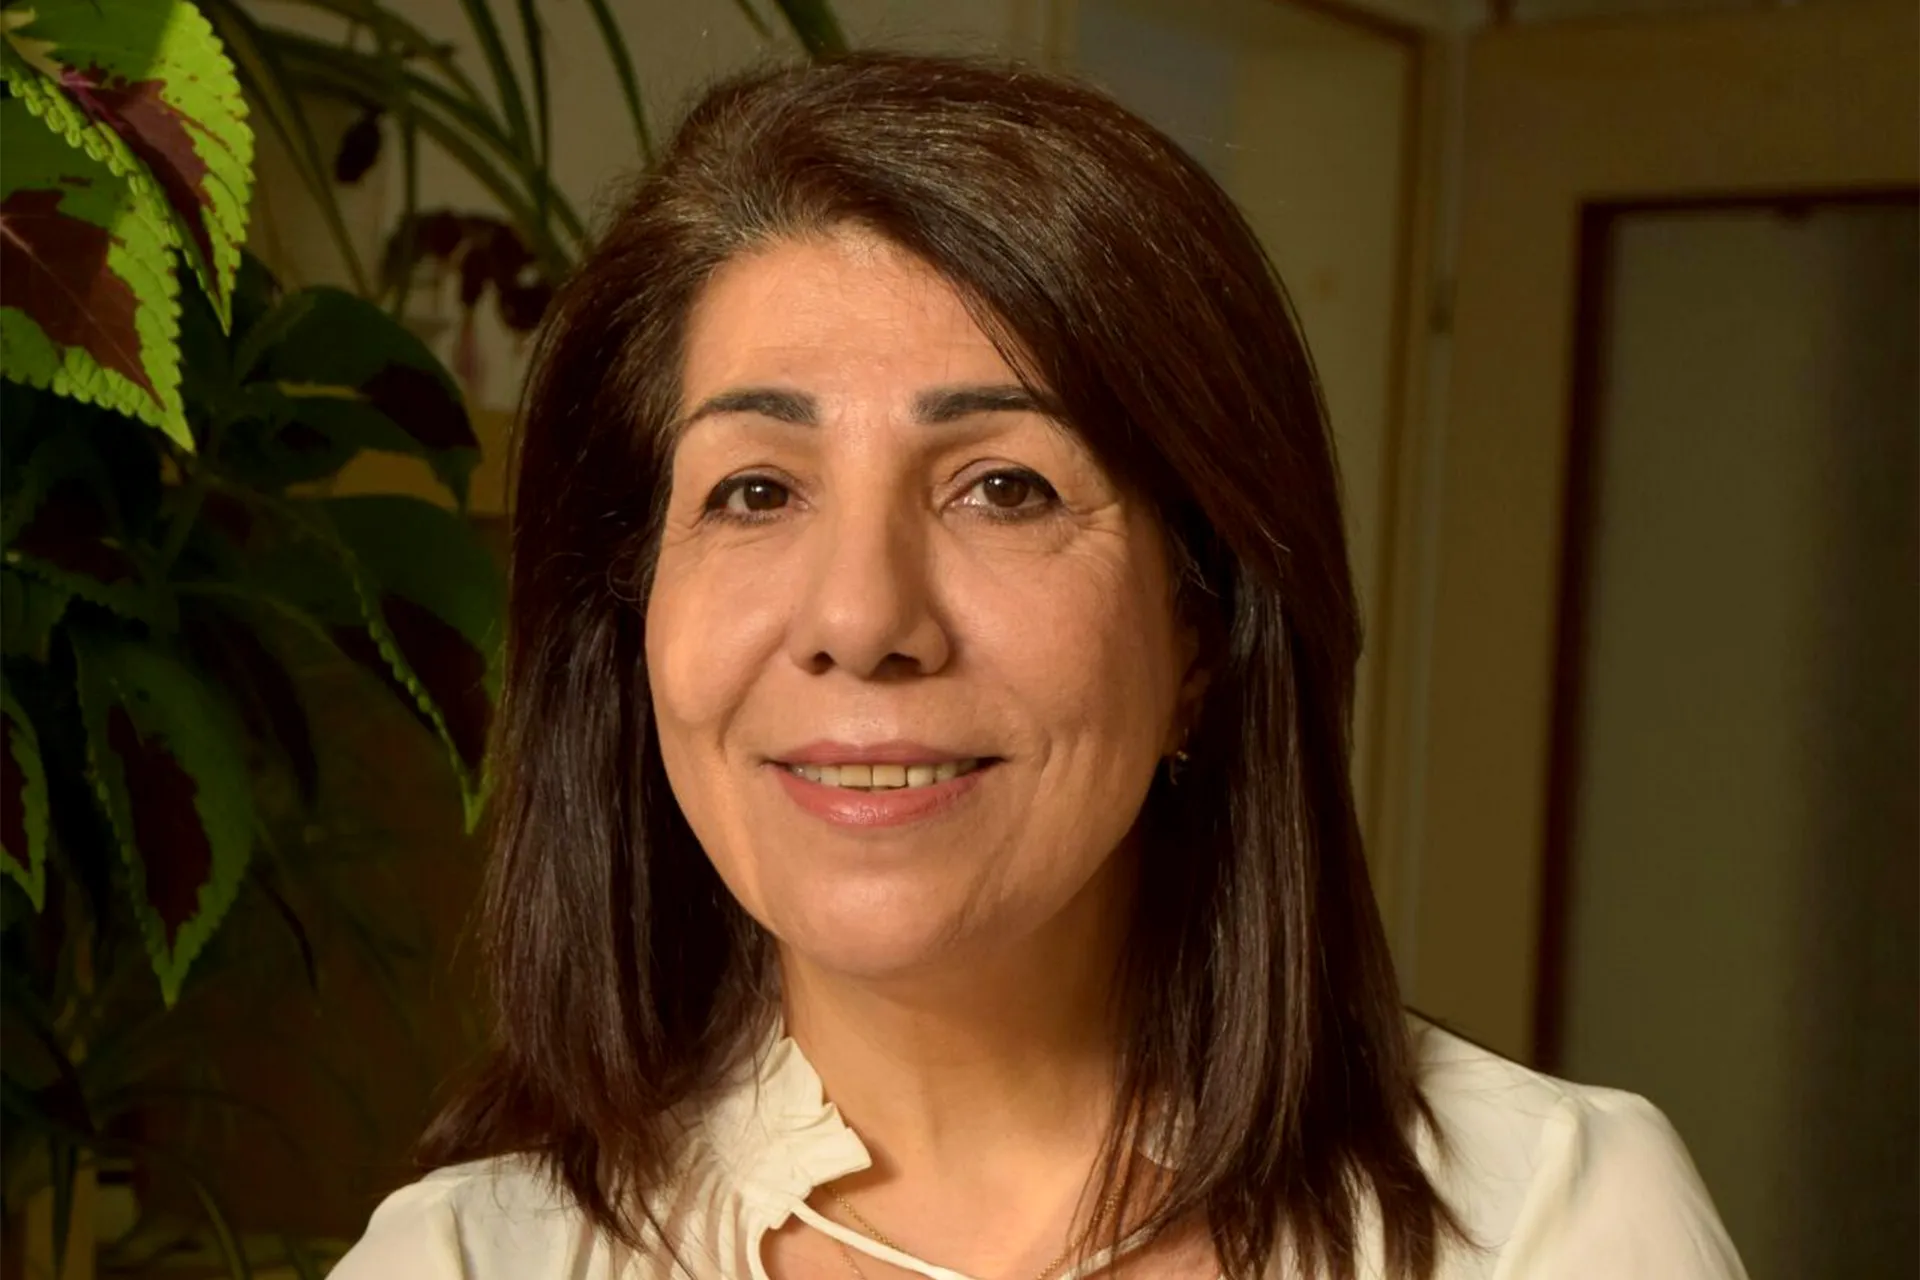 Headshot of a woman with shoulder-length brown hair (Najat Abed Alsamad)